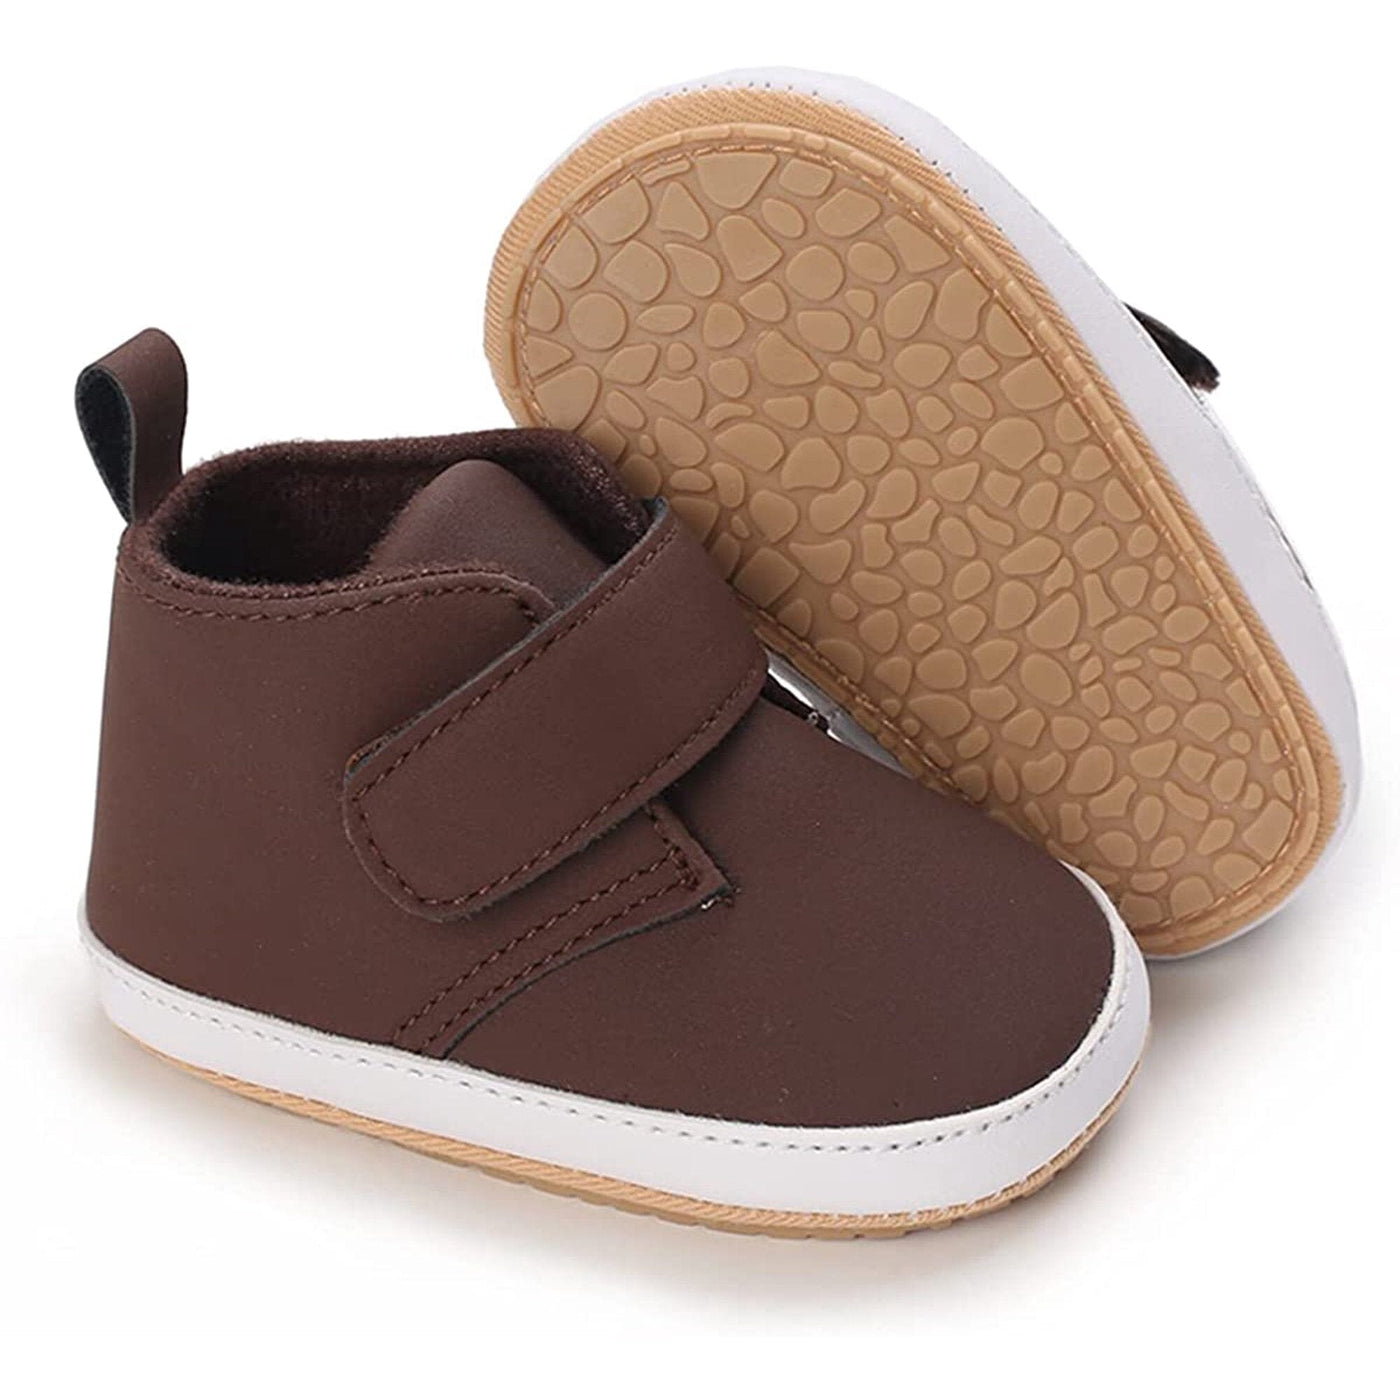 Baby Boy Moccasins Sneakers Shoes Iluvlittlepeople 